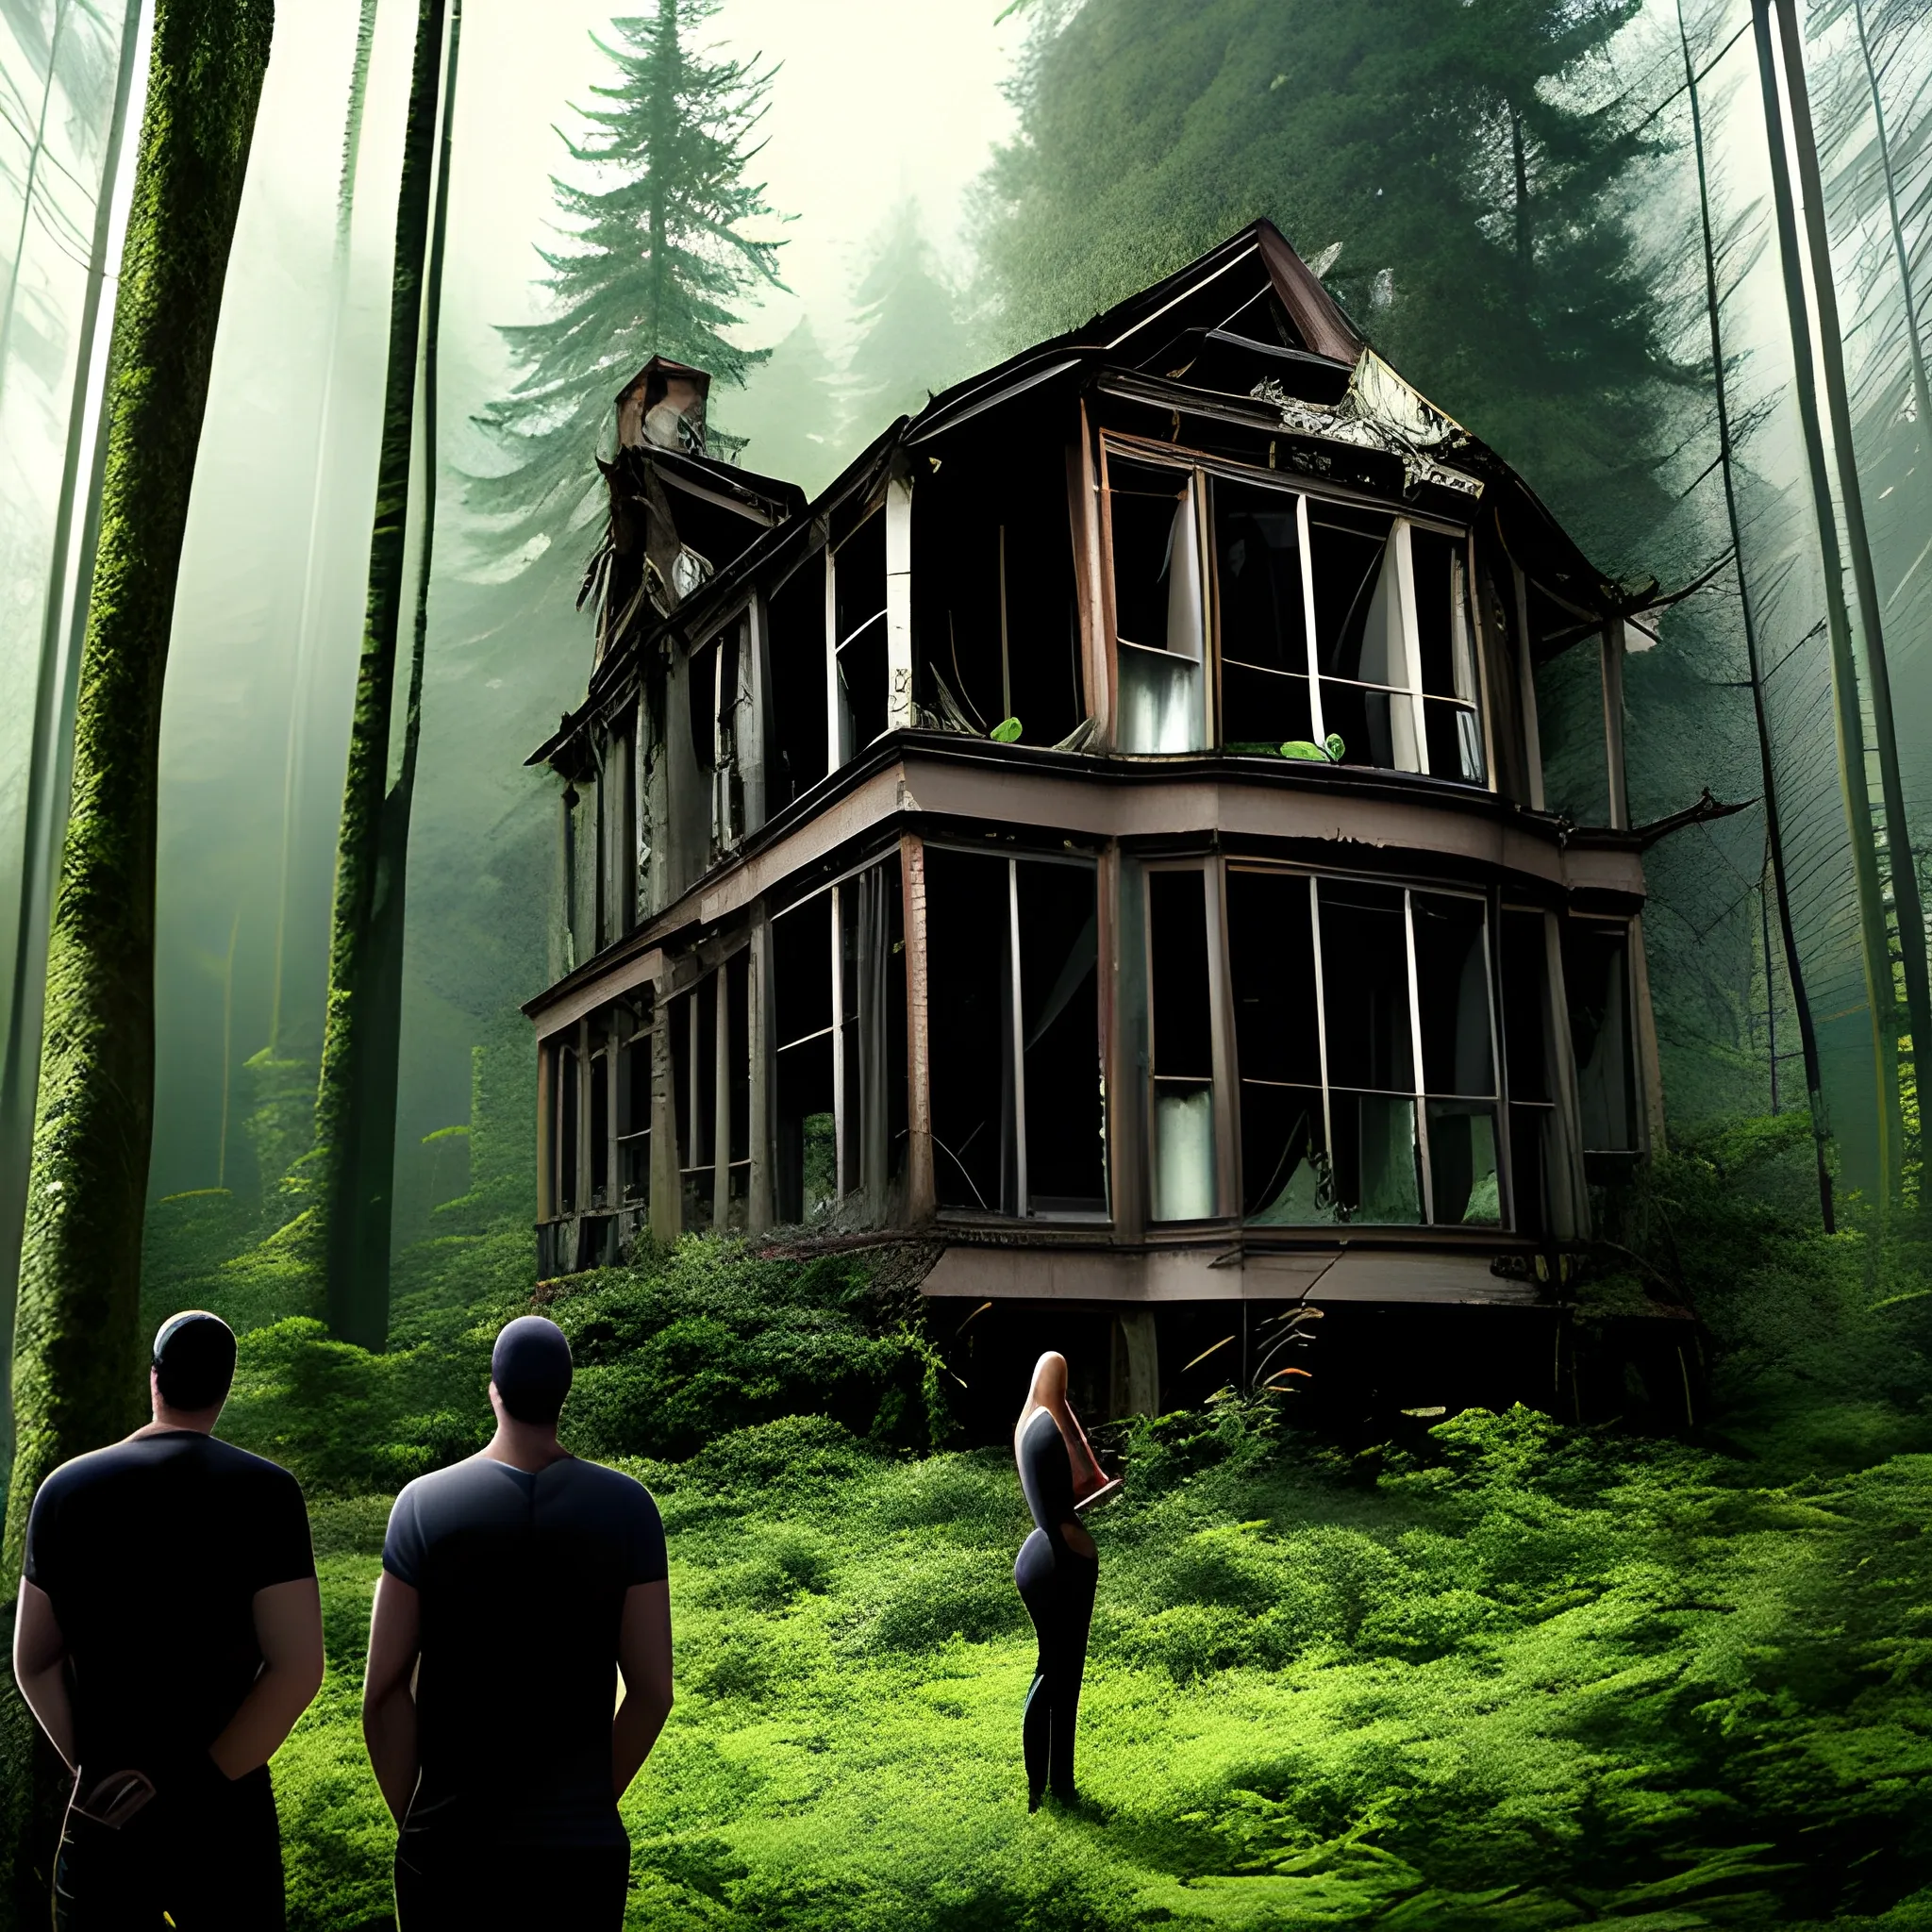 "Four children, two boys and two girls, standing near a dense forest, looking curiously at an old, dilapidated house that has appeared among the trees.", , Trippy